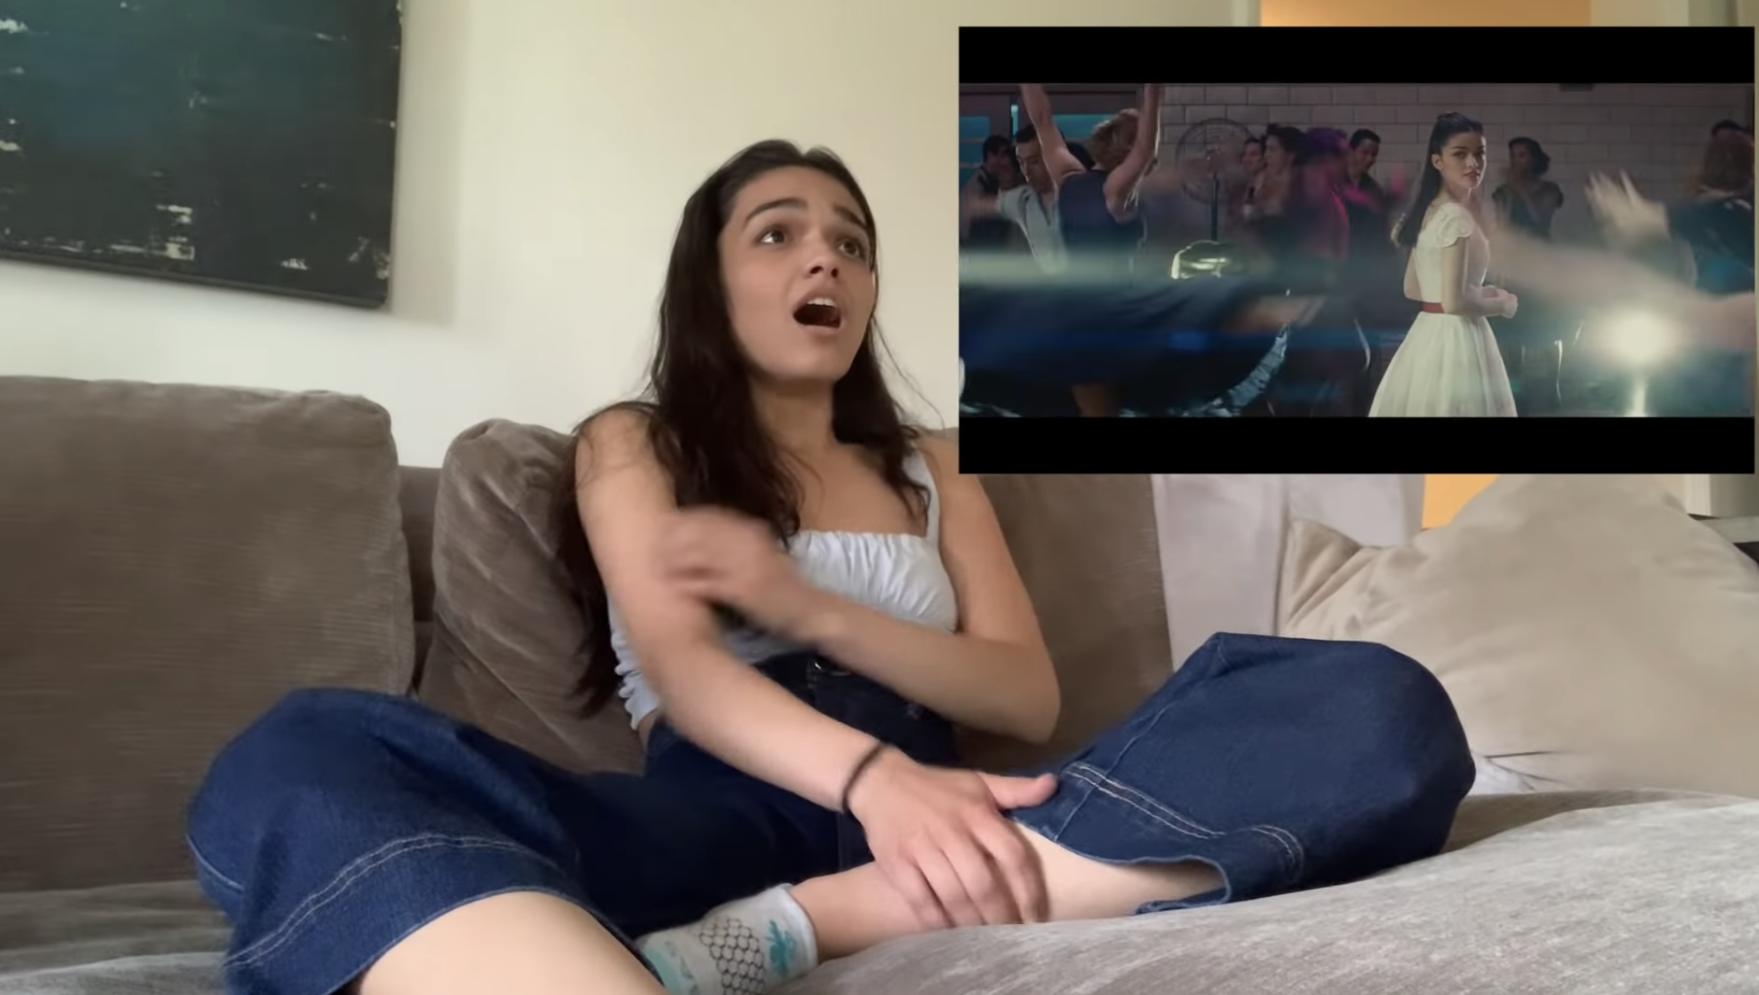 Rachel Zegler having a live reaction to seeing the West Side Story trailer for the first time